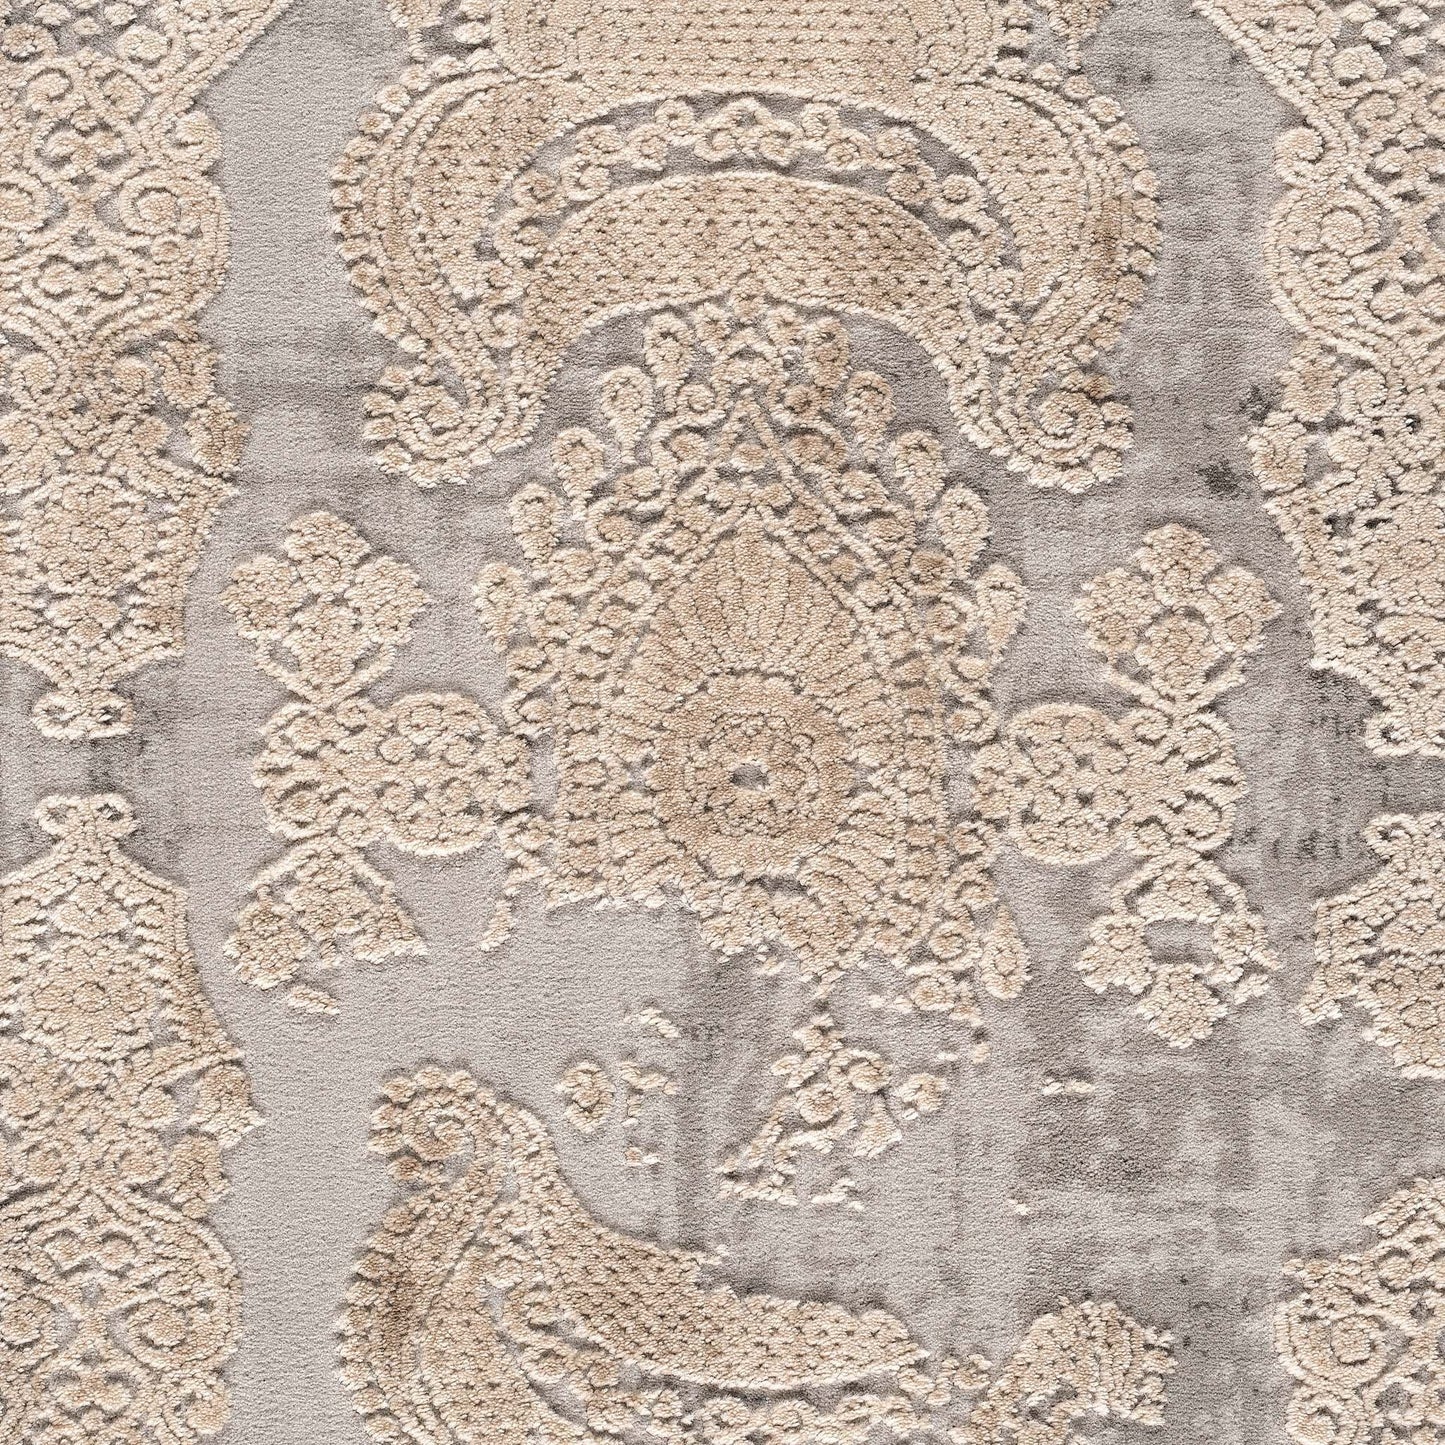 This ultra-modern collection consists of highly popular designs and colours sculpted into a textured pile made from heat-set polyester and polypropylene. The pastel tones and indistinct patterns used in these rugs make them suitable for any décor. These r